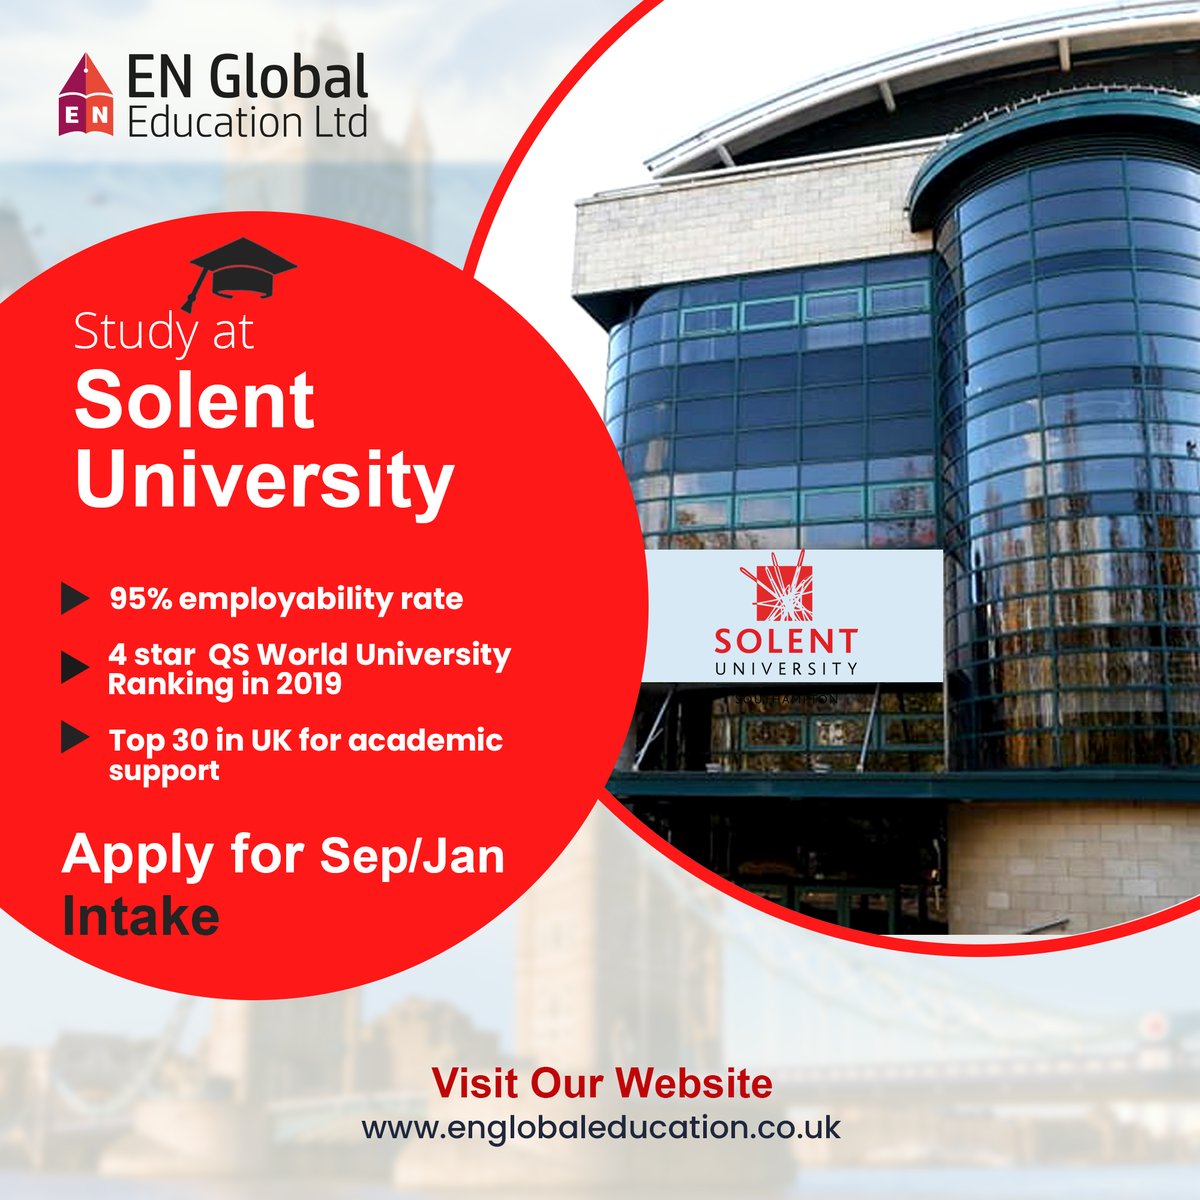 Solent University is taking applications for SEPTEMBER 2023!

#solentuniversity #studyinUK #education #studyabroad #bachelor #masters #psw #pswuk #students #learning #englobaleducationltd #englobal #privateuniversity #publicuniversities